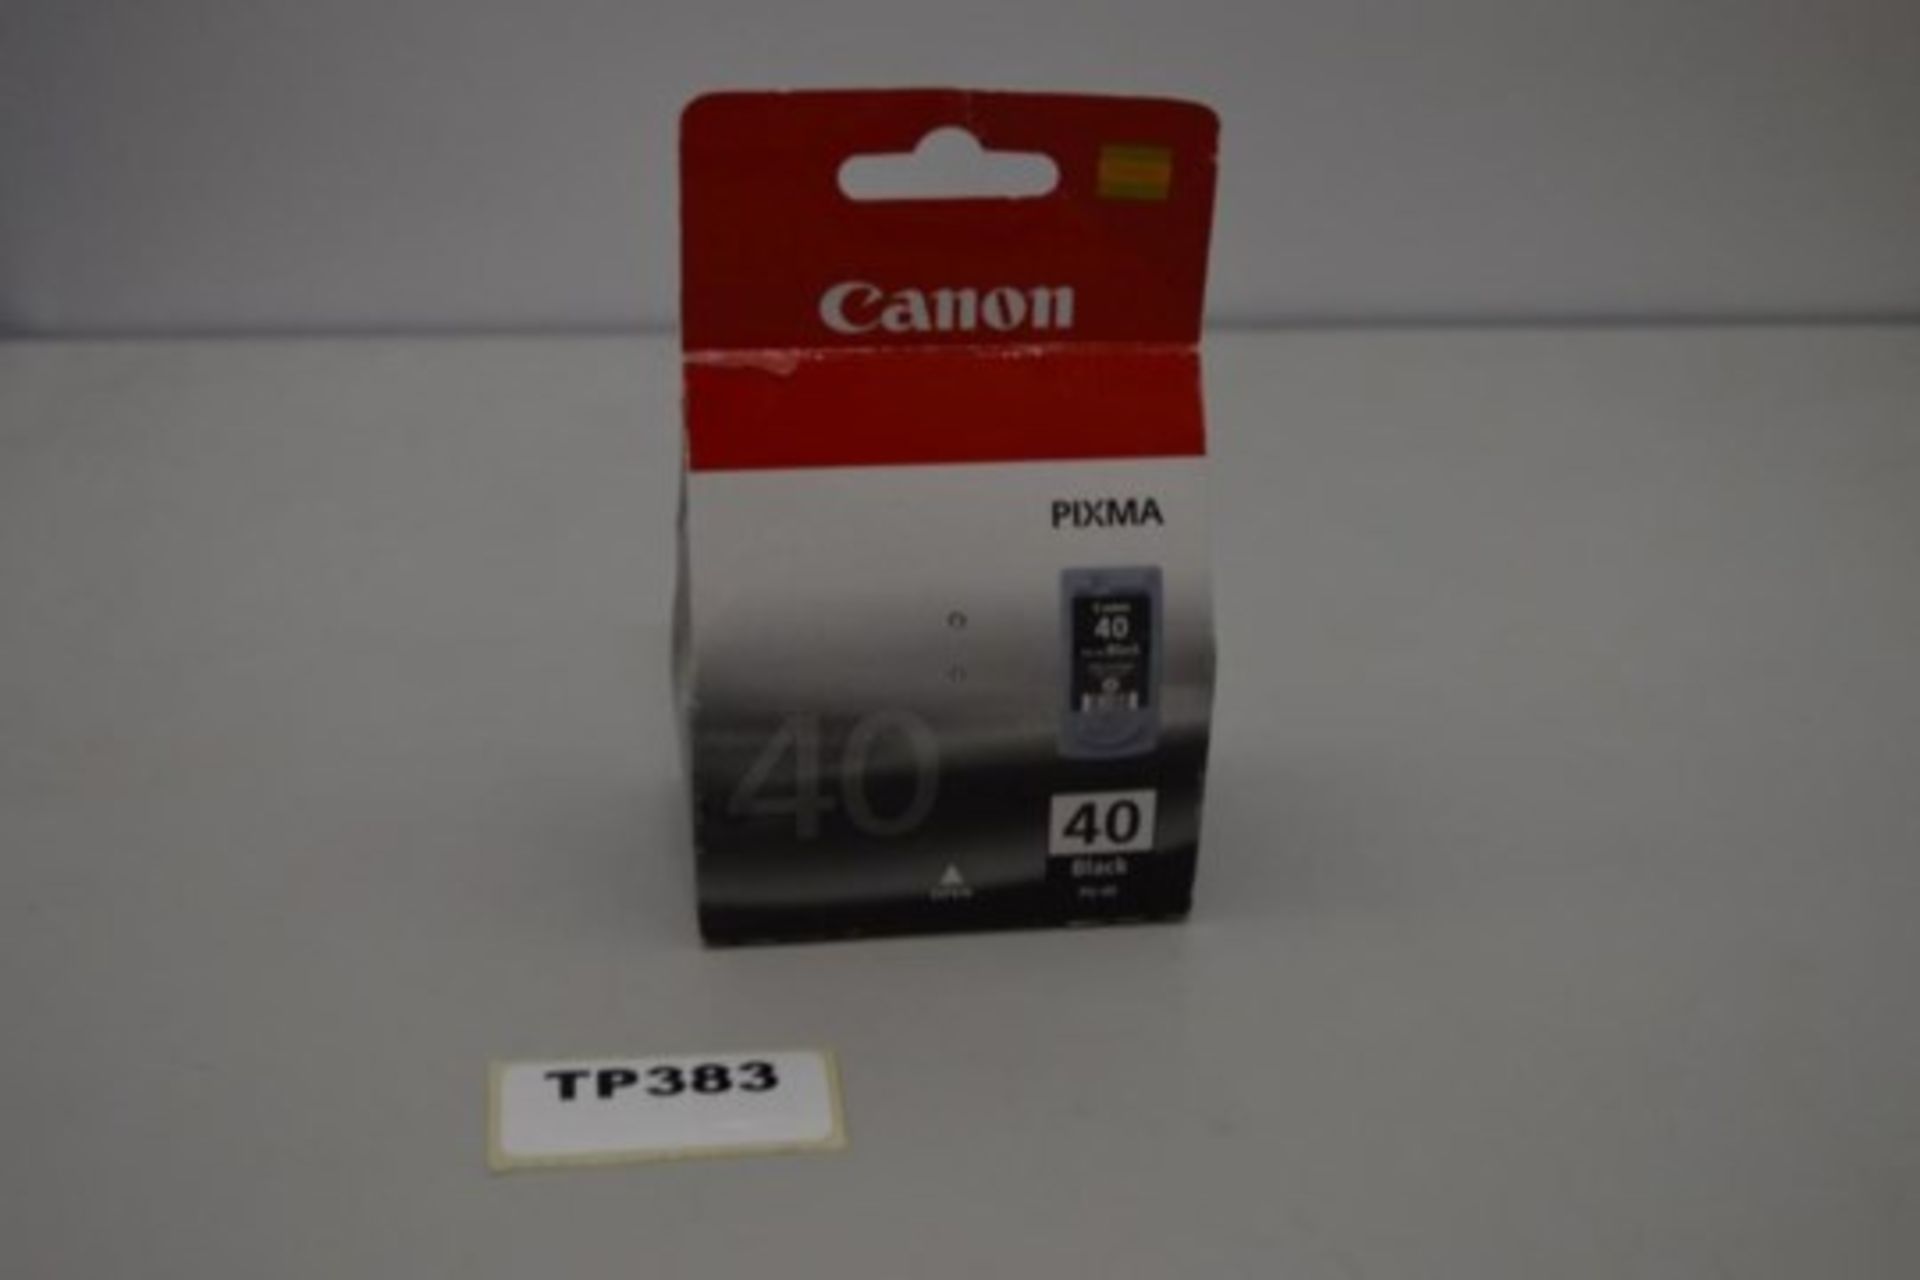 12 x Various Unused  Toner / Ink Printer Cartidges - CL011 - See Description For Inventory - - Image 8 of 9